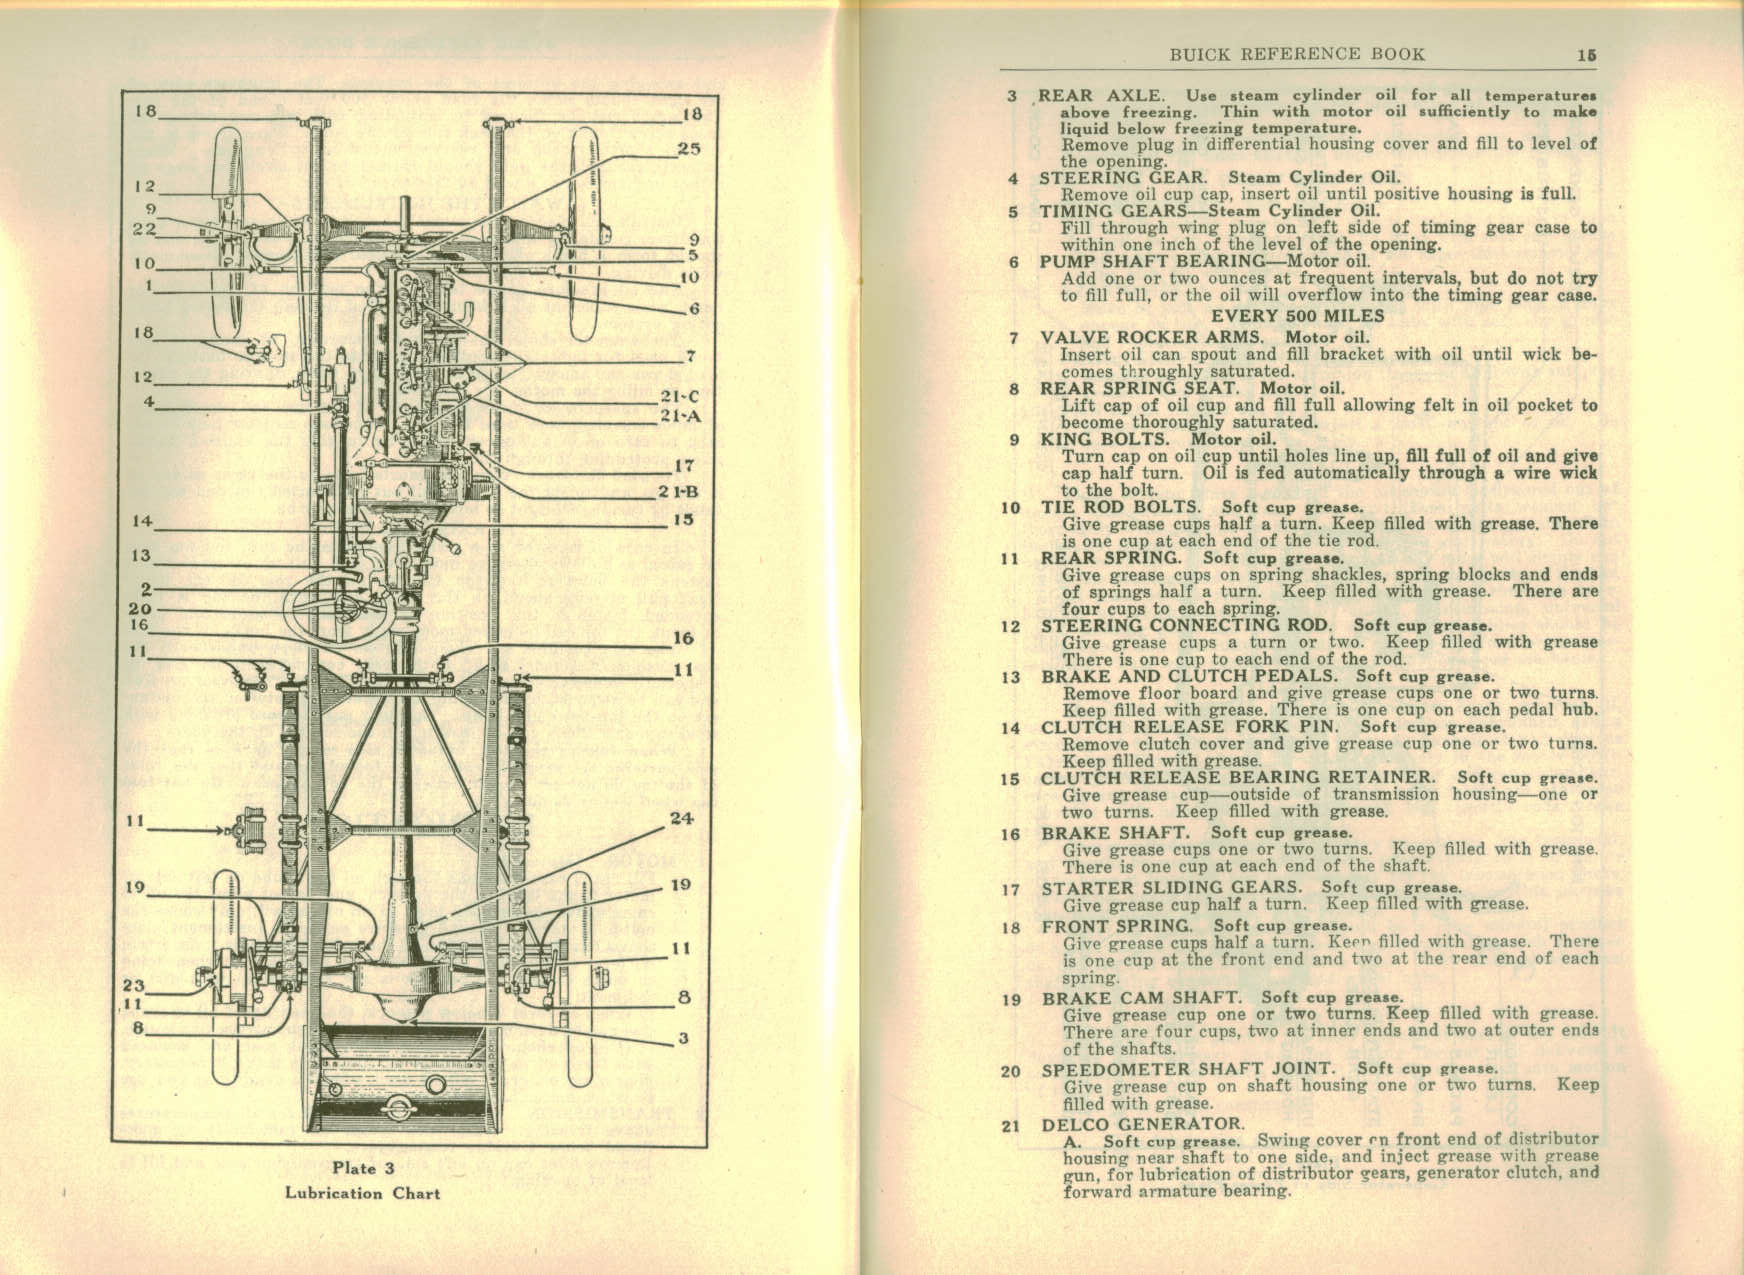 1920 Buick Reference Book-14-15